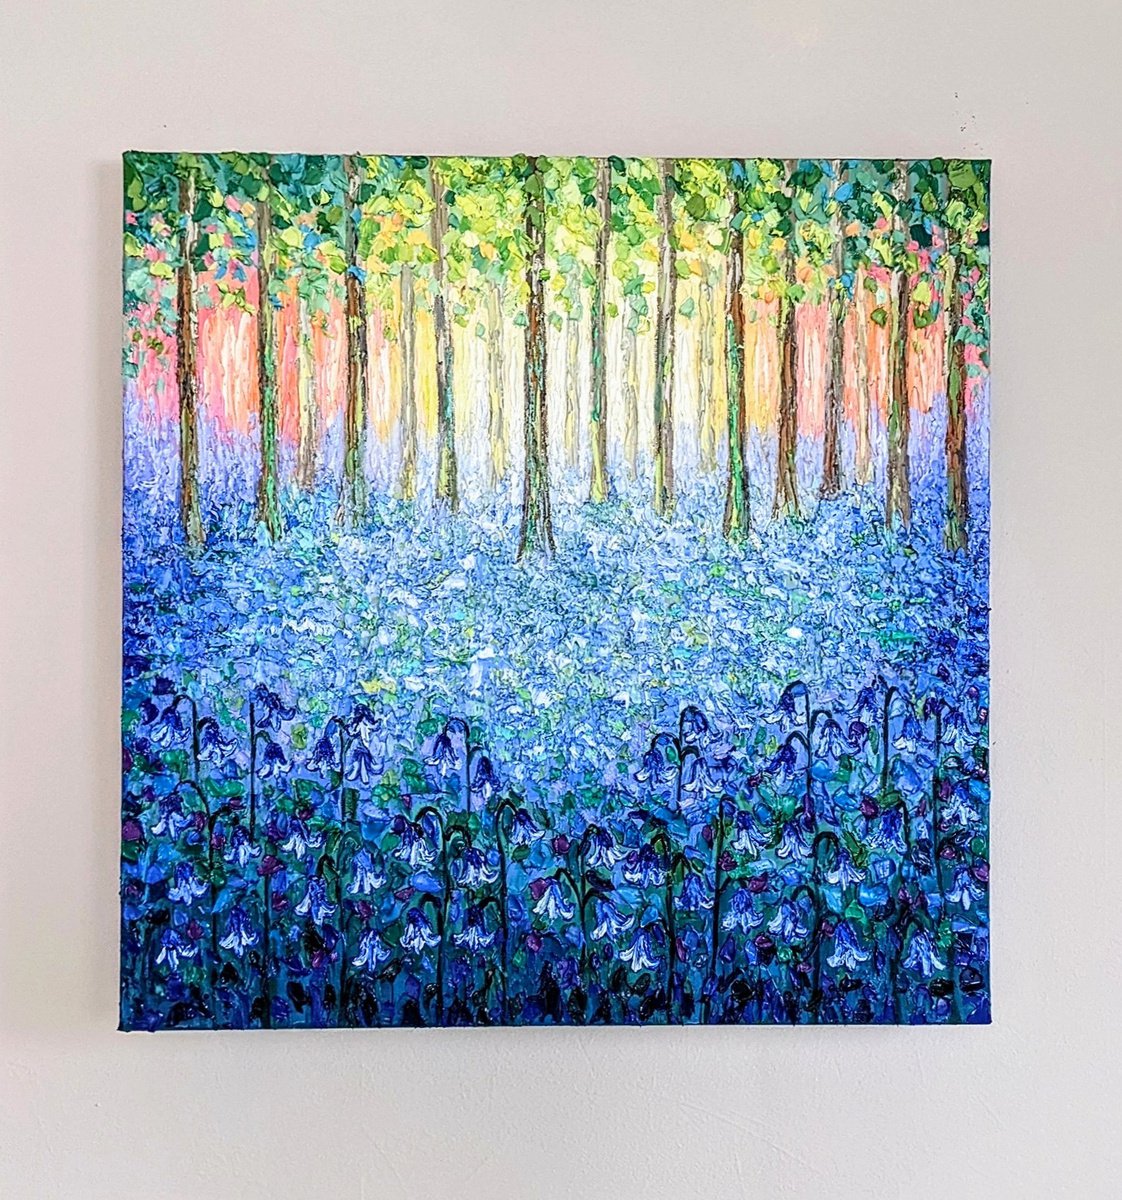 Bluebells at sunset by Paige Castile